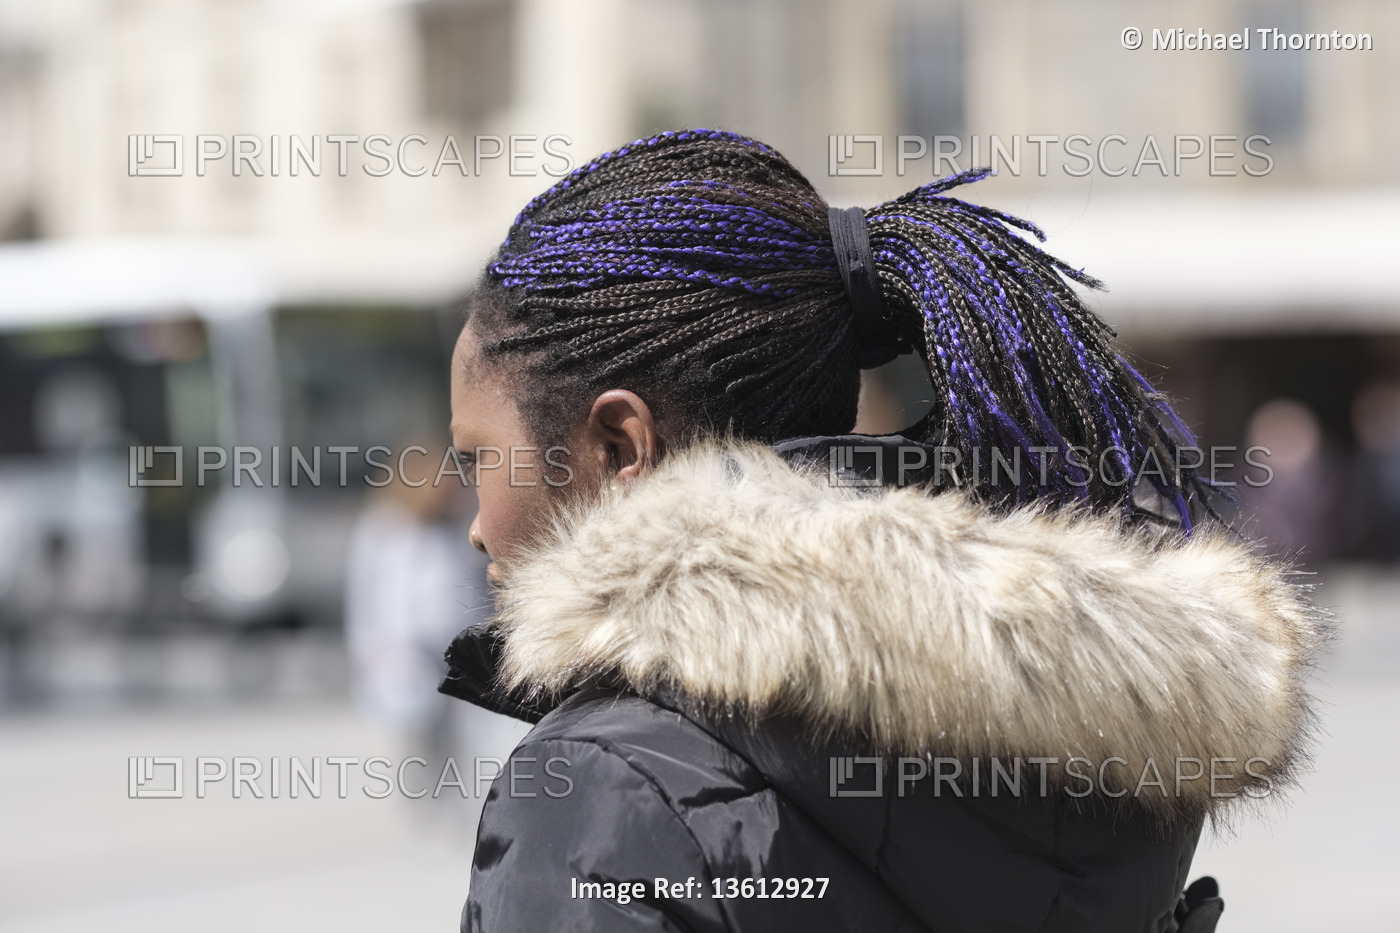 Young lady with creative hairstyle, Plaza de la Virgen Blance, Vitoria- ...